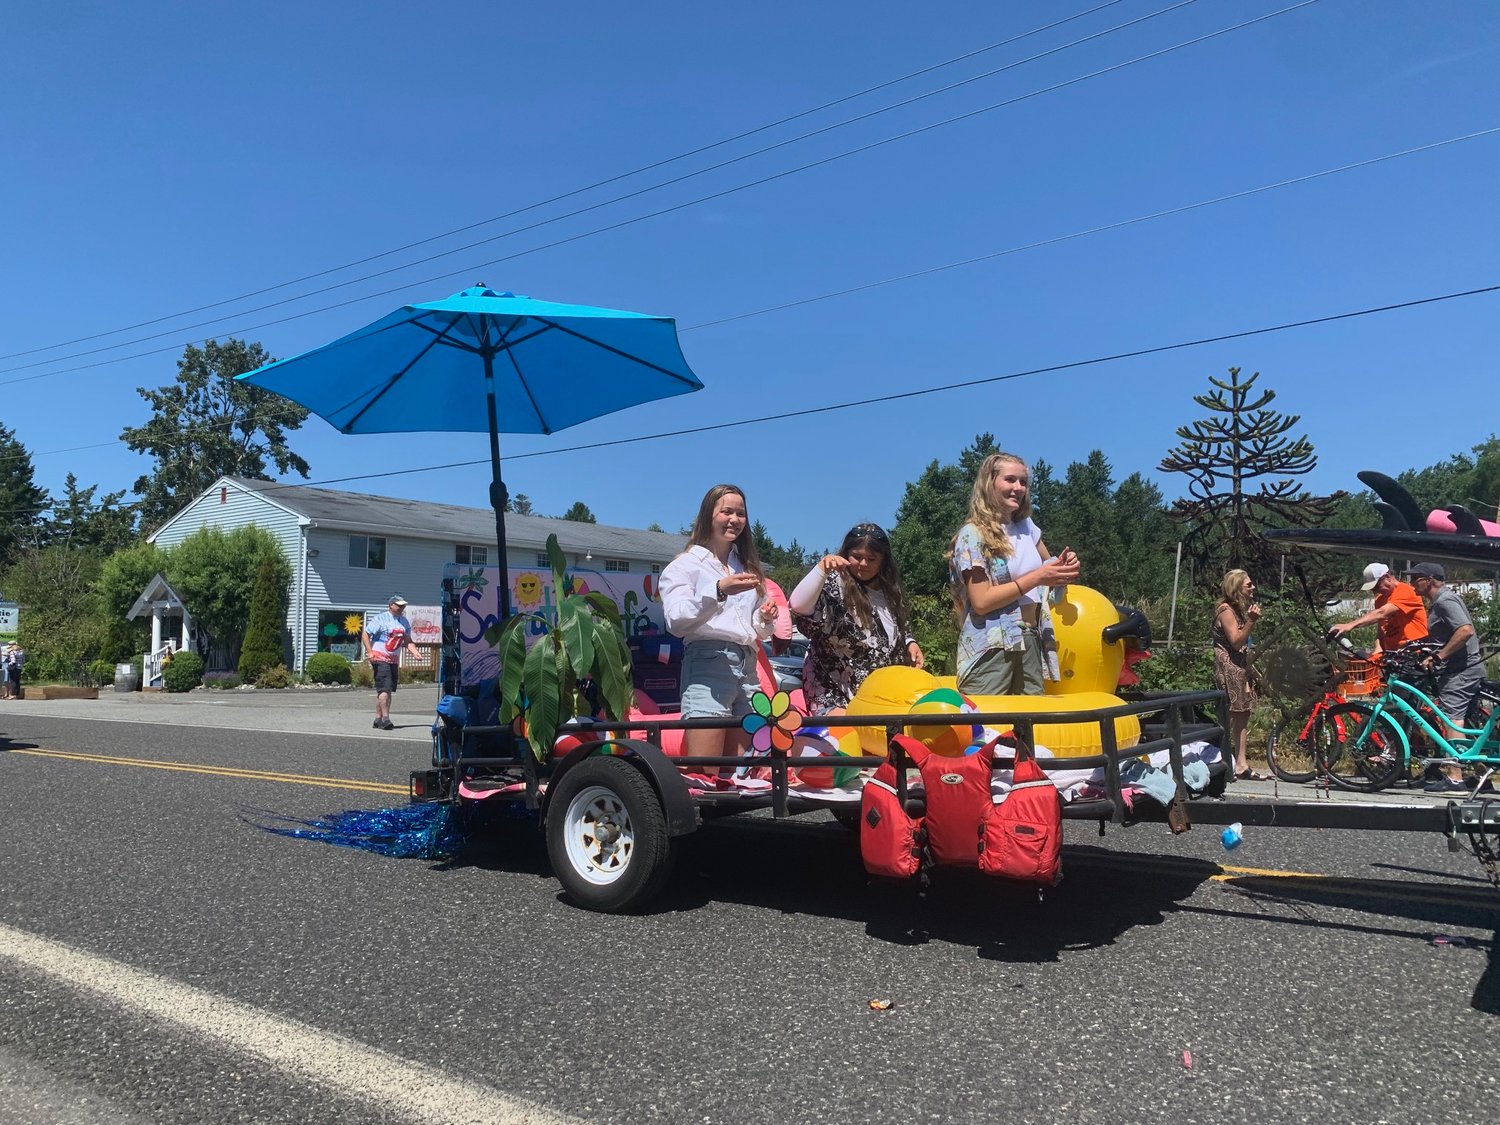 The Fourth of July parade started from the Breakers parking lot along Gulf Road and ran down Tyee Drive to the marina overflow parking lot on Sunday.